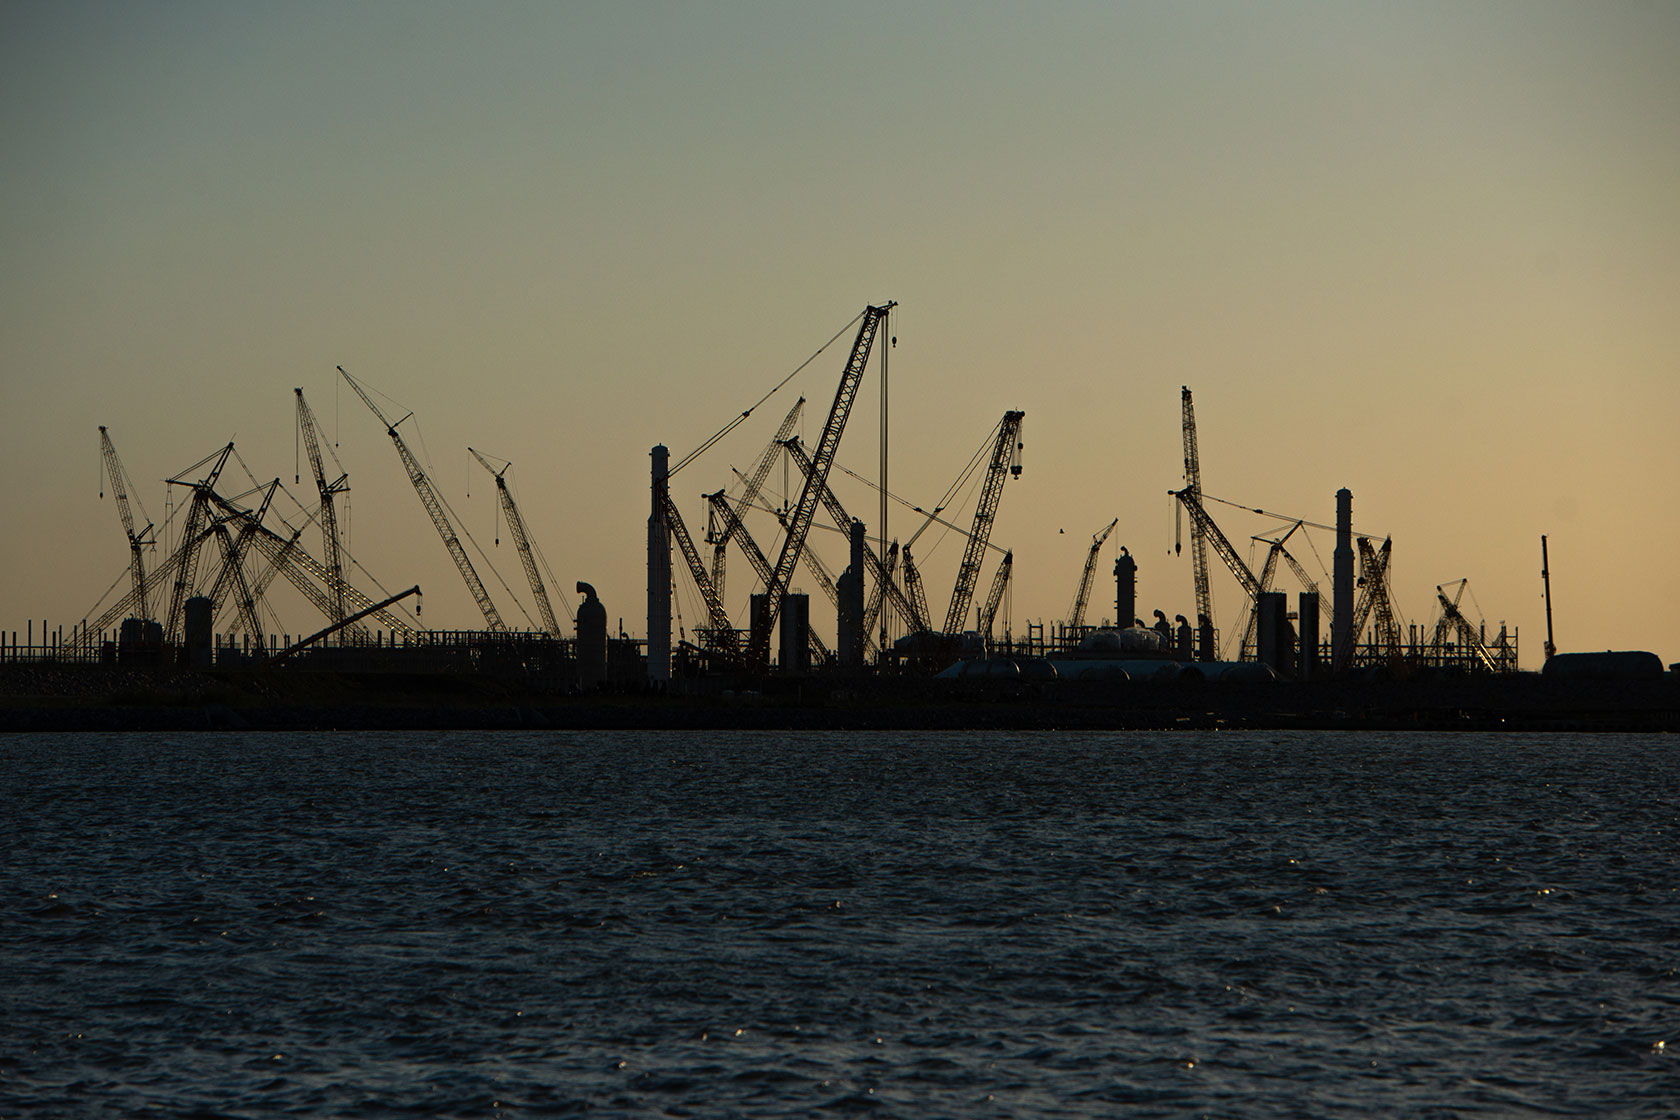 Construction cranes stand silhouetted by the sunset at the Golden Pass LNG terminal.